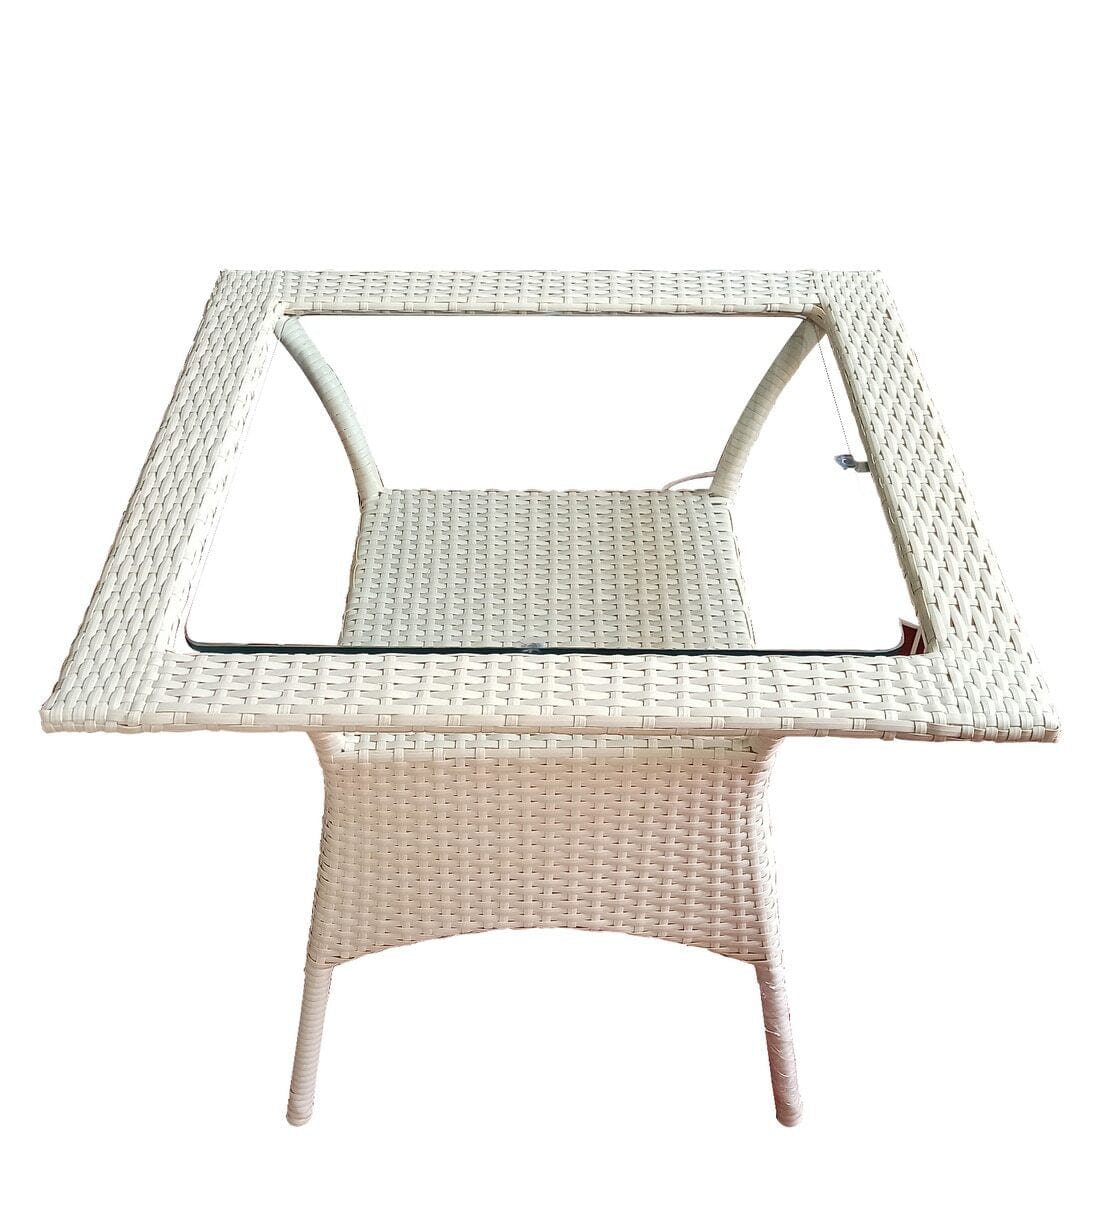 Dreamline Garden Patio Coffee Table Set (1+2), 2 Chairs And Small Square Table (Cream)